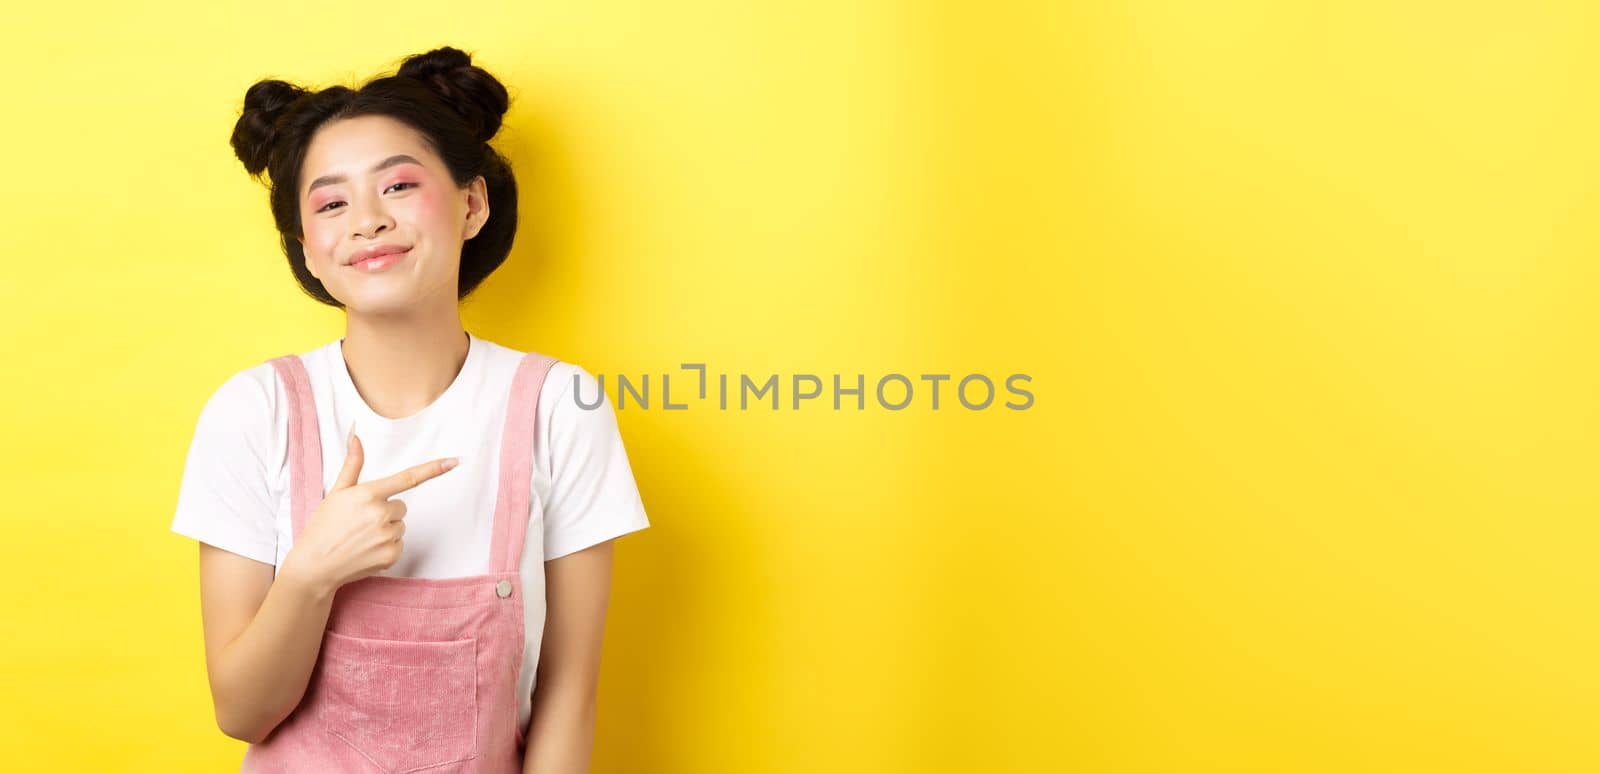 Stylish asian teen girl with romantic makeup, smiling cute and pointing finger right at logo, standing against yellow background.